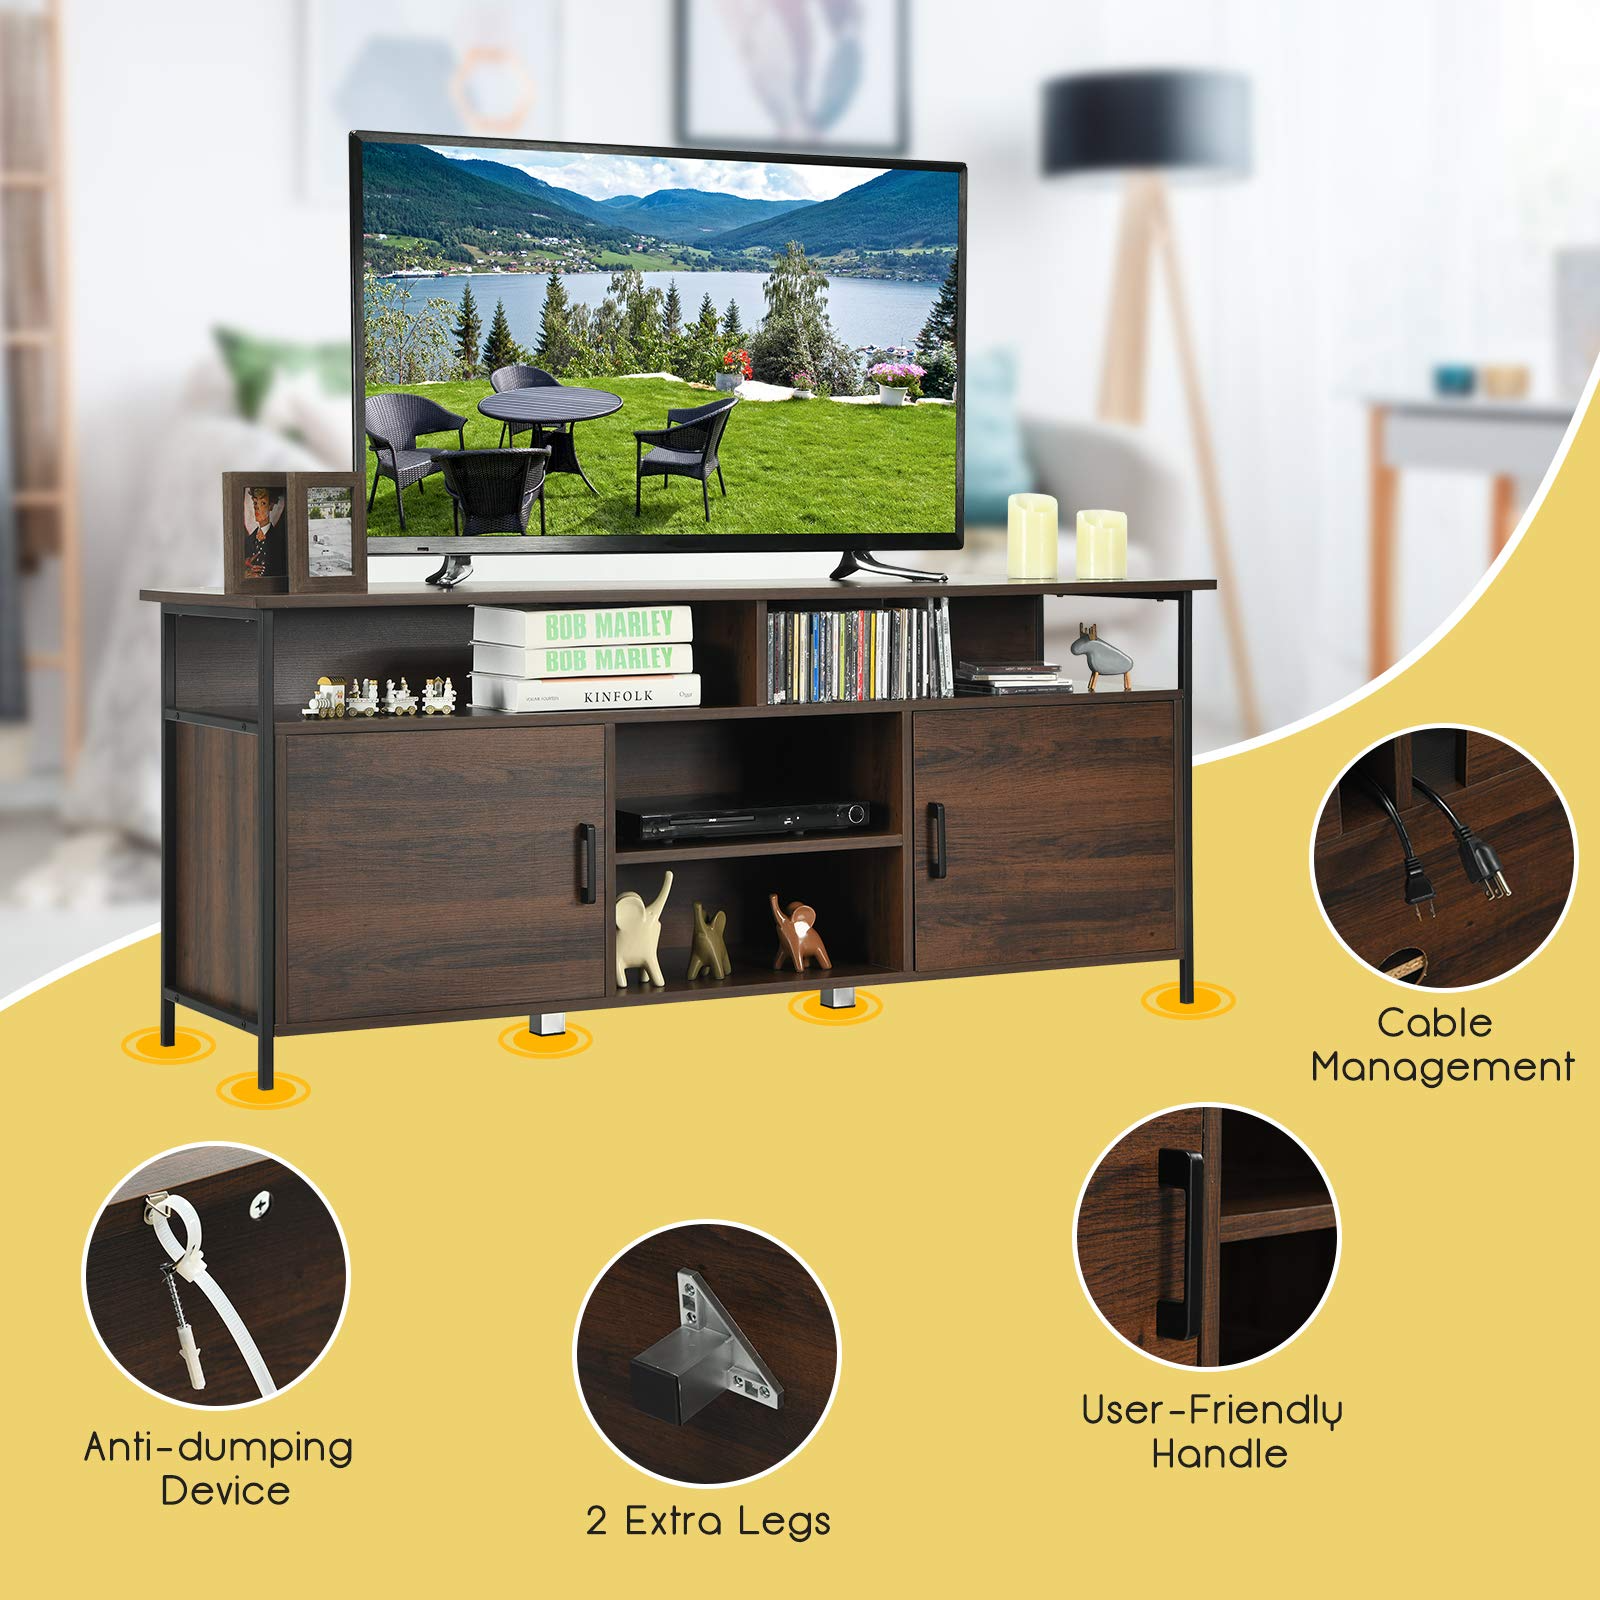  Wood Universal TV Stand for TVs up to 65 Inches - Tangkula